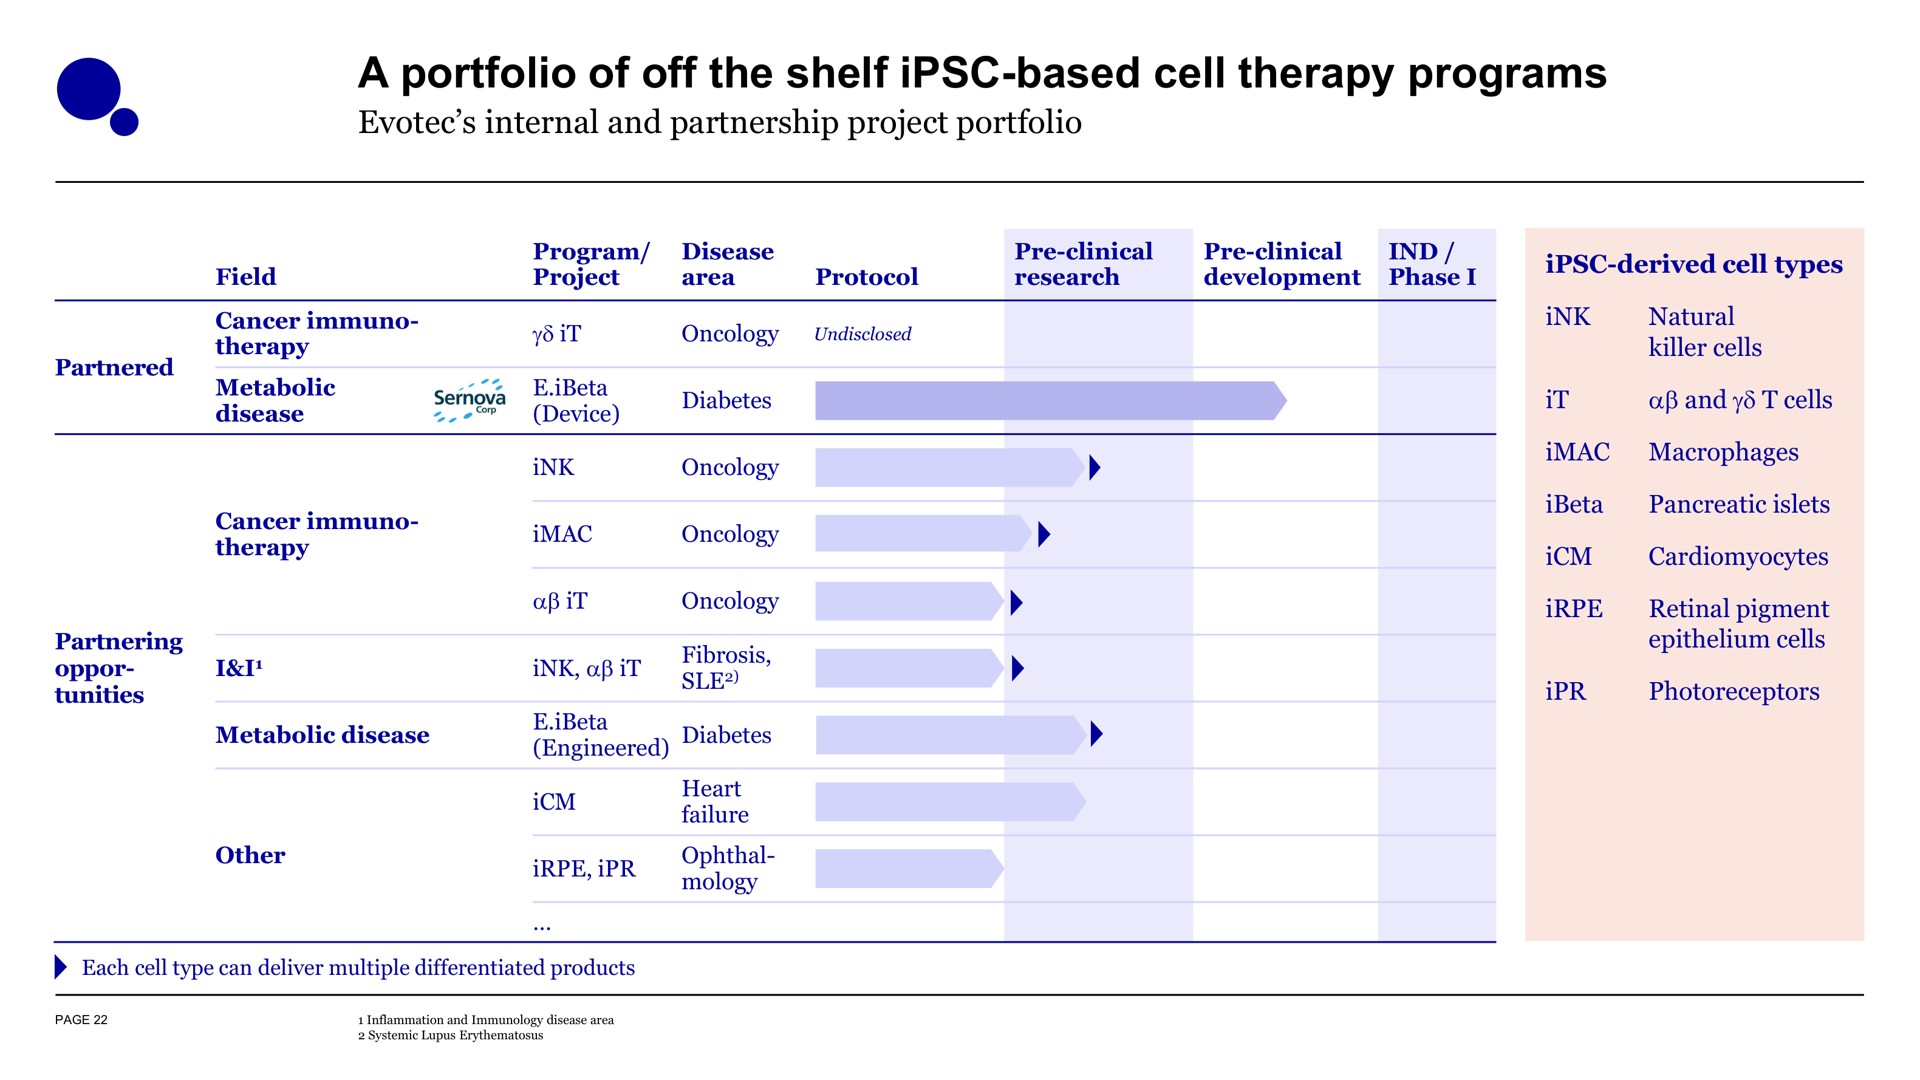 a portfolio of off the shelf based cell therapy programs | Evotec